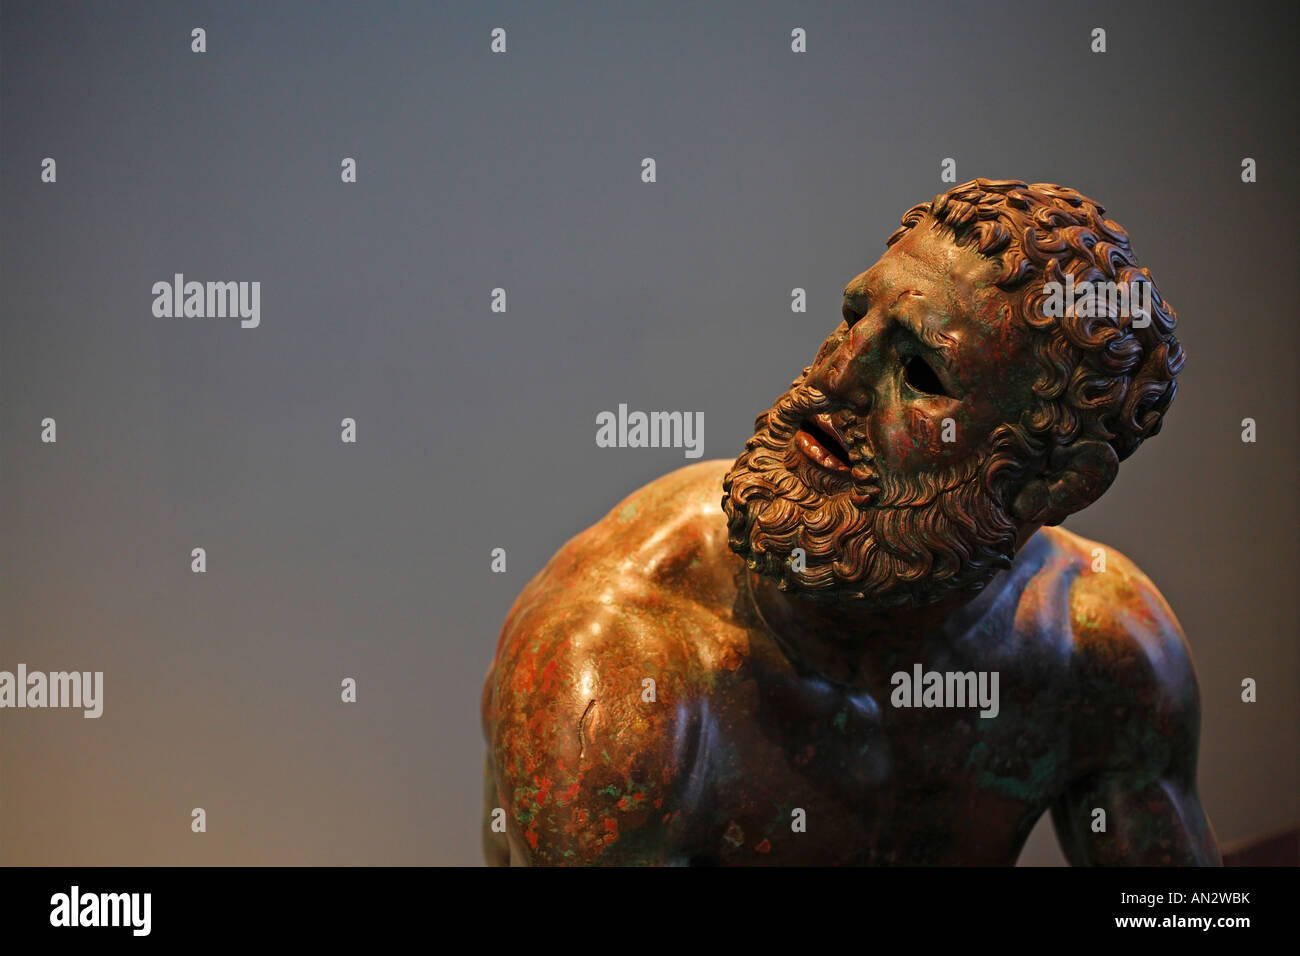 The bronze statue of the Boxer, Palazzo Massimo alle Terme, National Museum of Rome, Italy Stock Photo